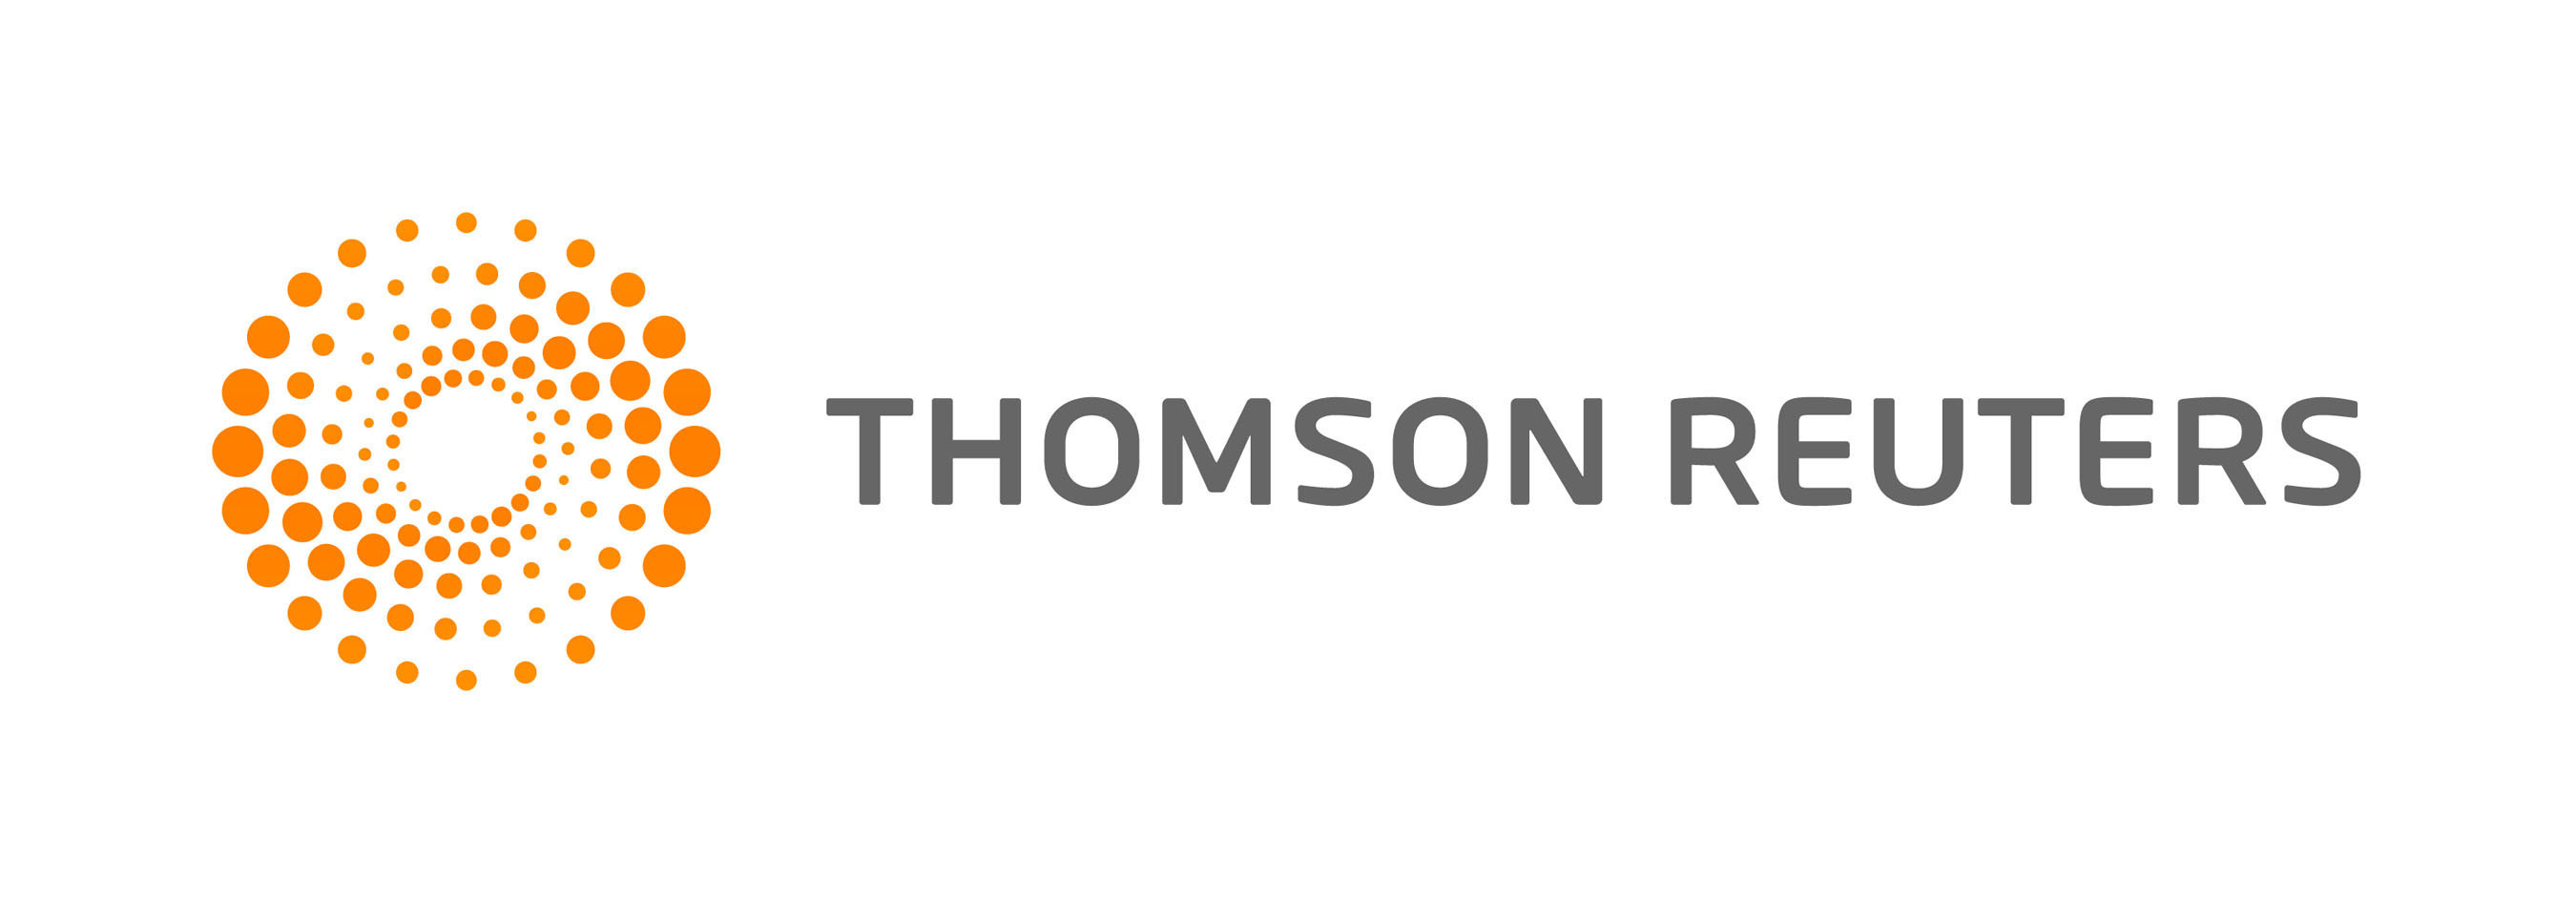 Thomson Reuters Statement on CEO Succession Planning